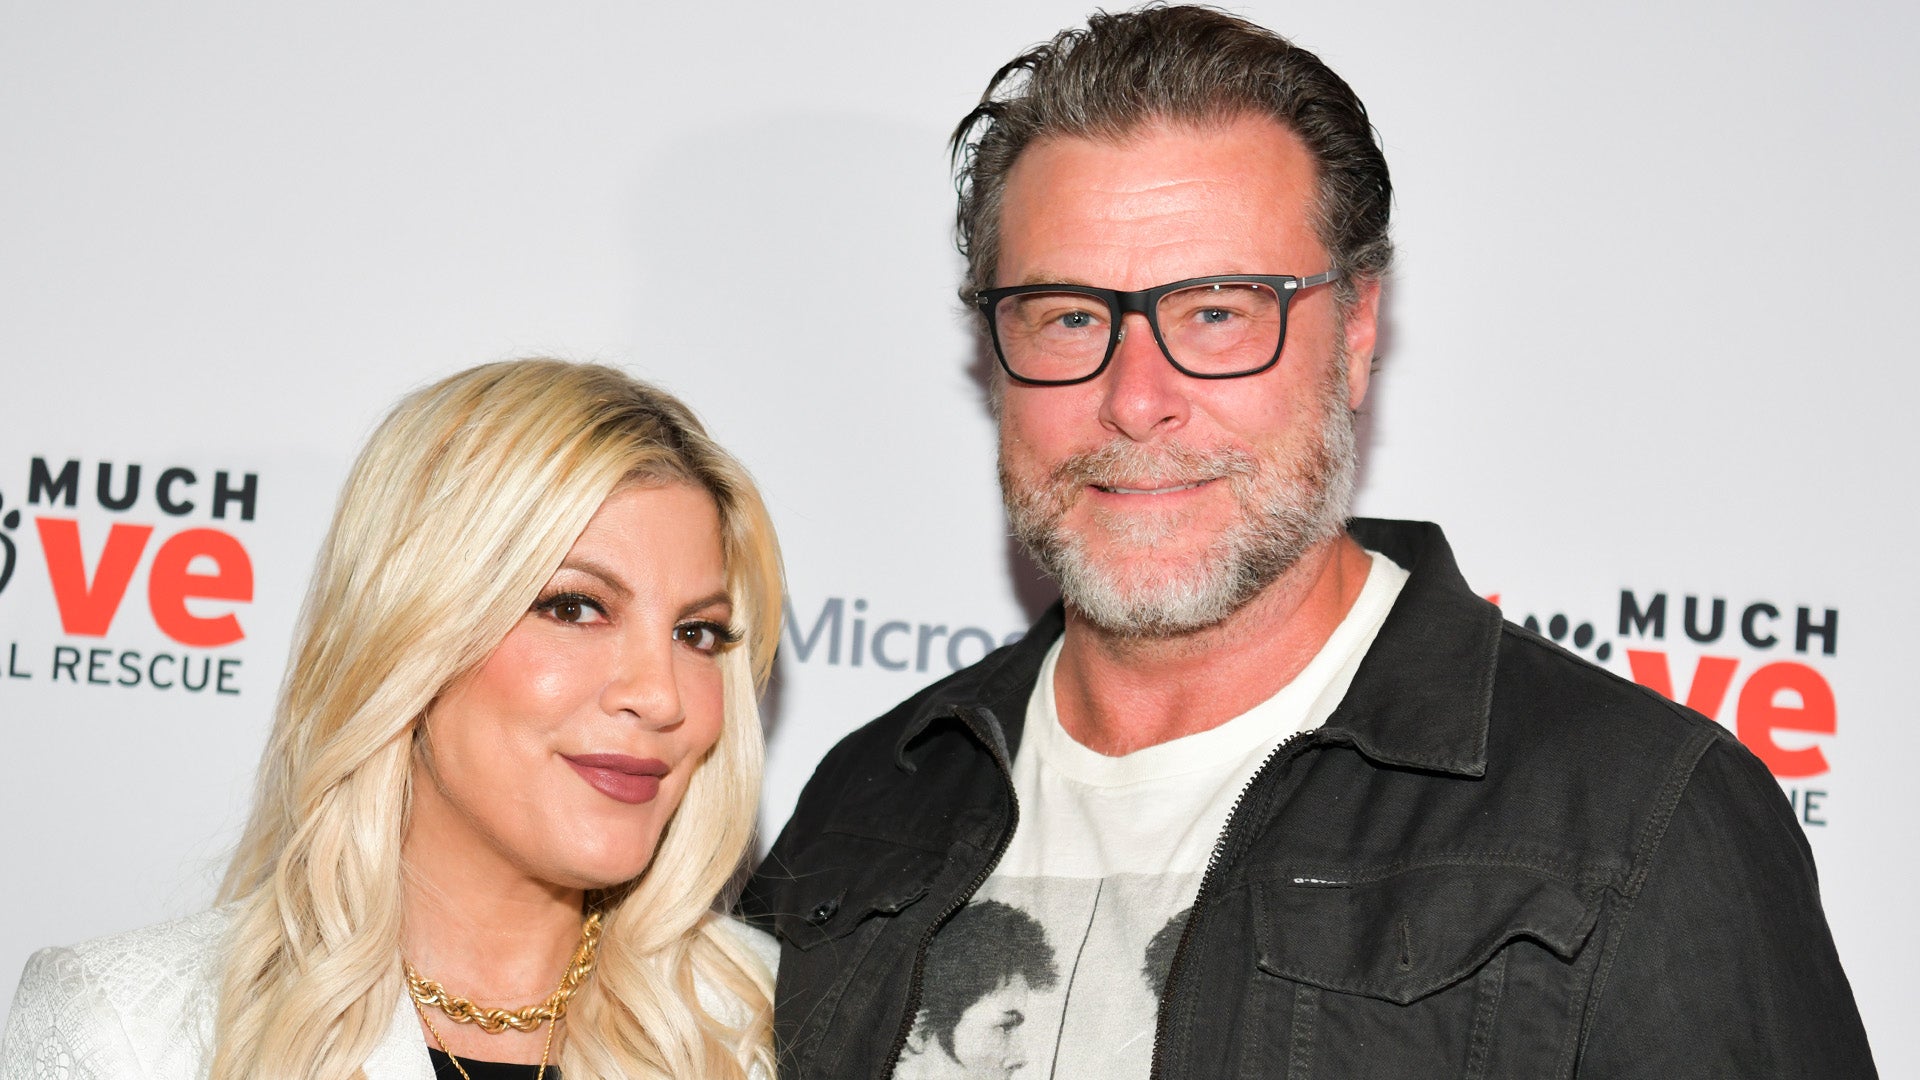 Inside Tori Spelling and Dean McDermott's Amicable Divorce (Source)